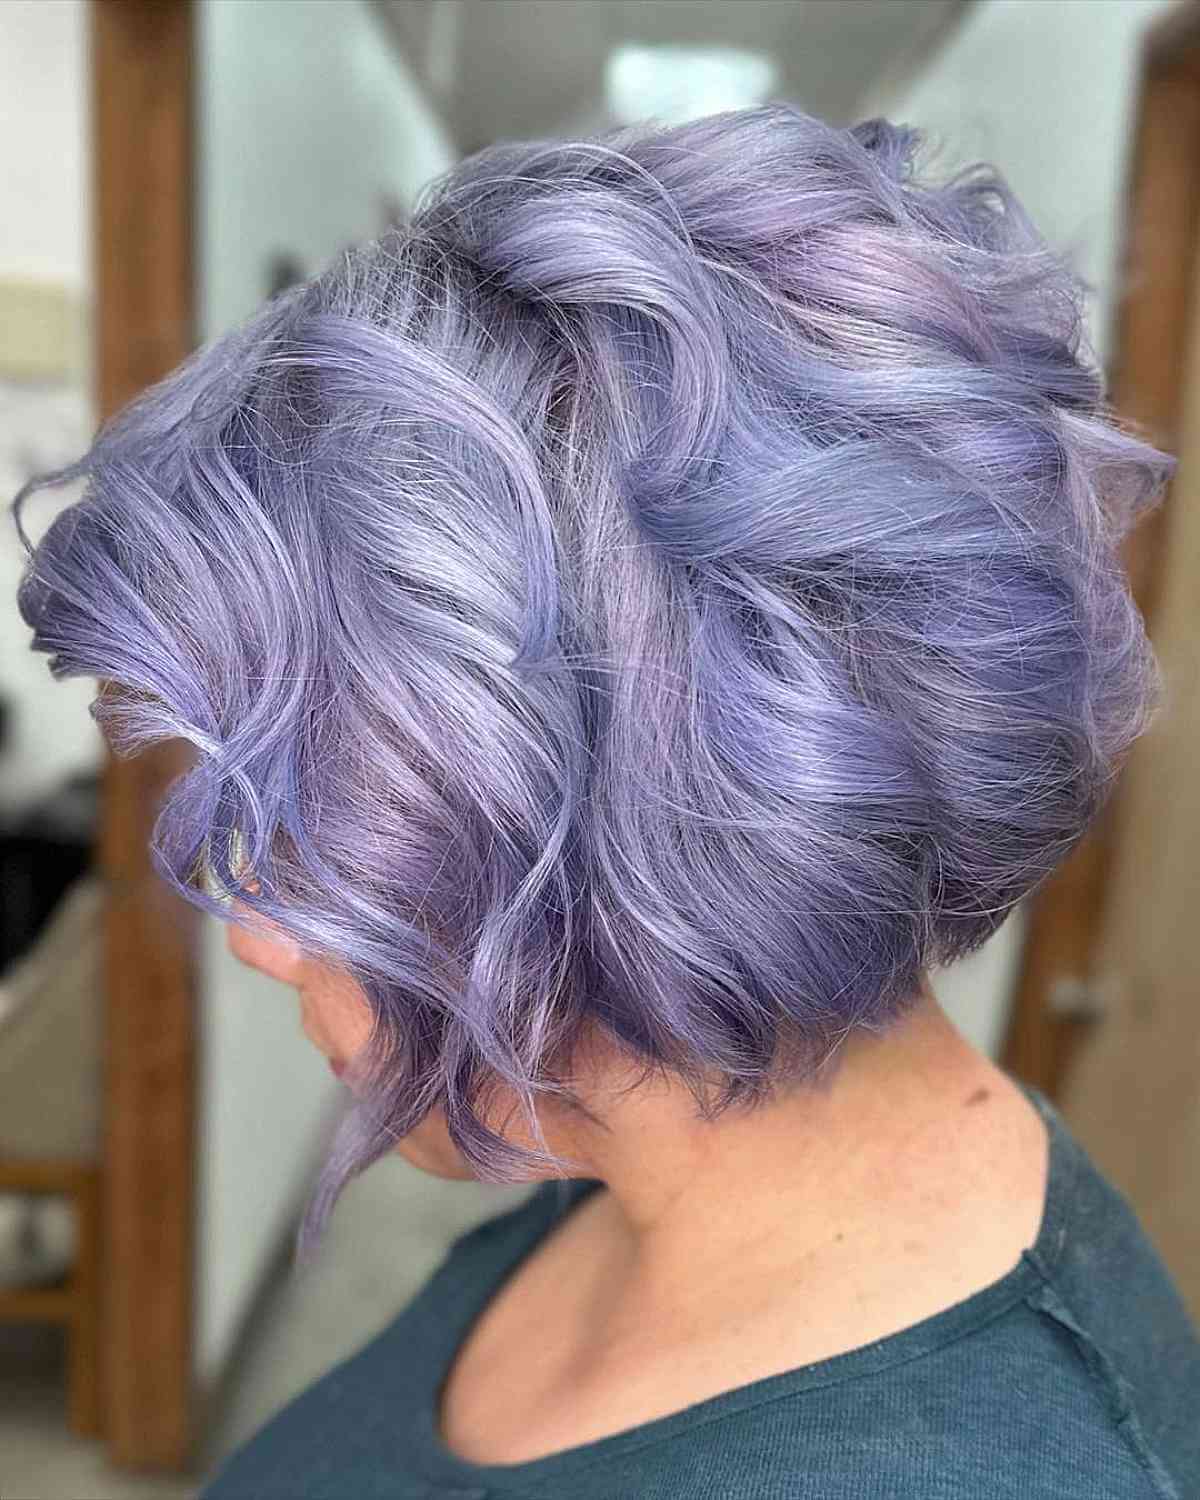 Shade of Light Purple Periwinkle Hair Color